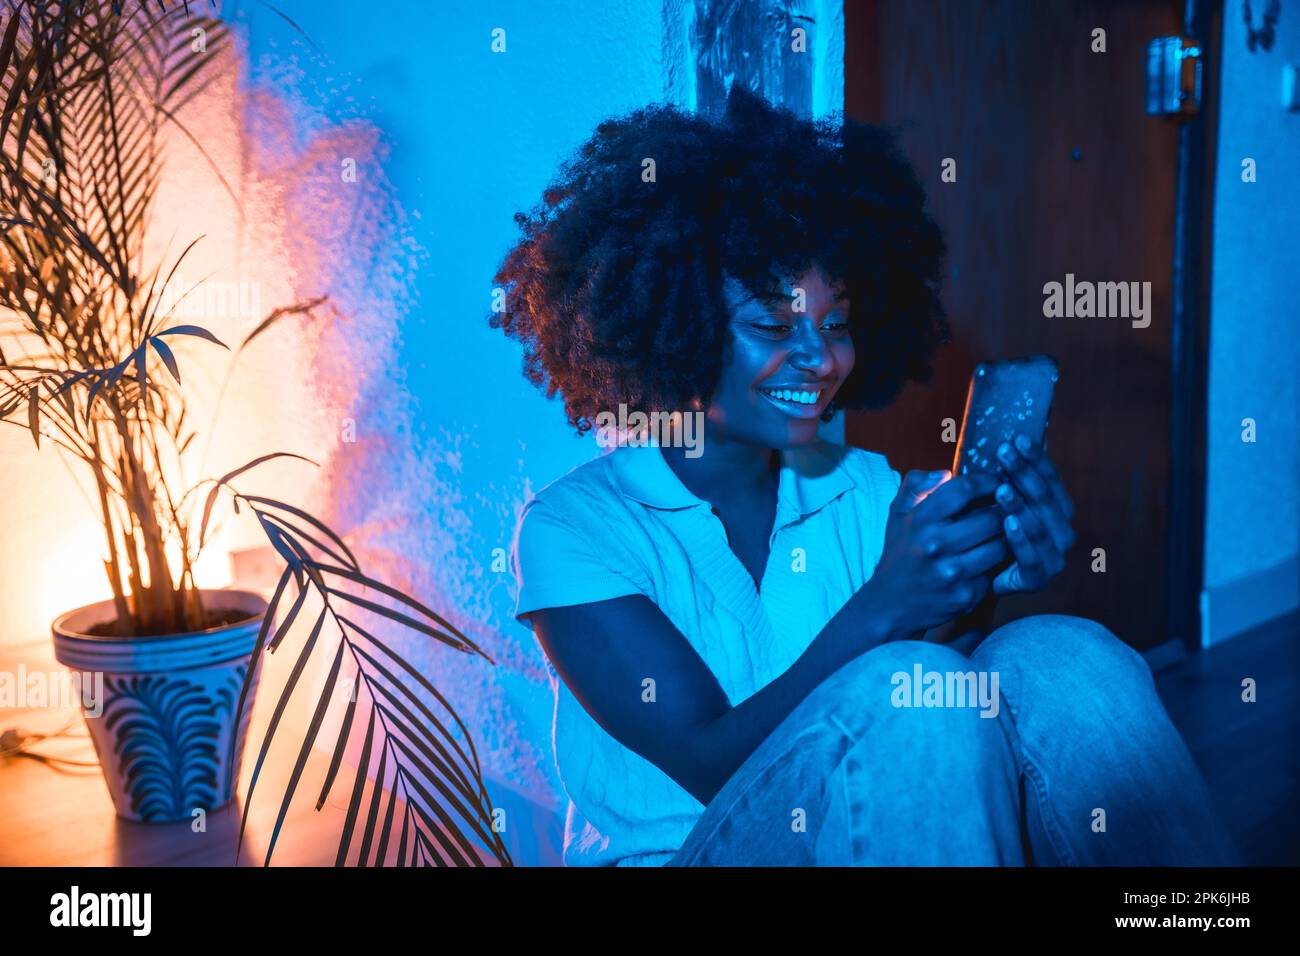 Woman with afro hair sitting at home on the floor looking at the phone at night with a blue light Stock Photo